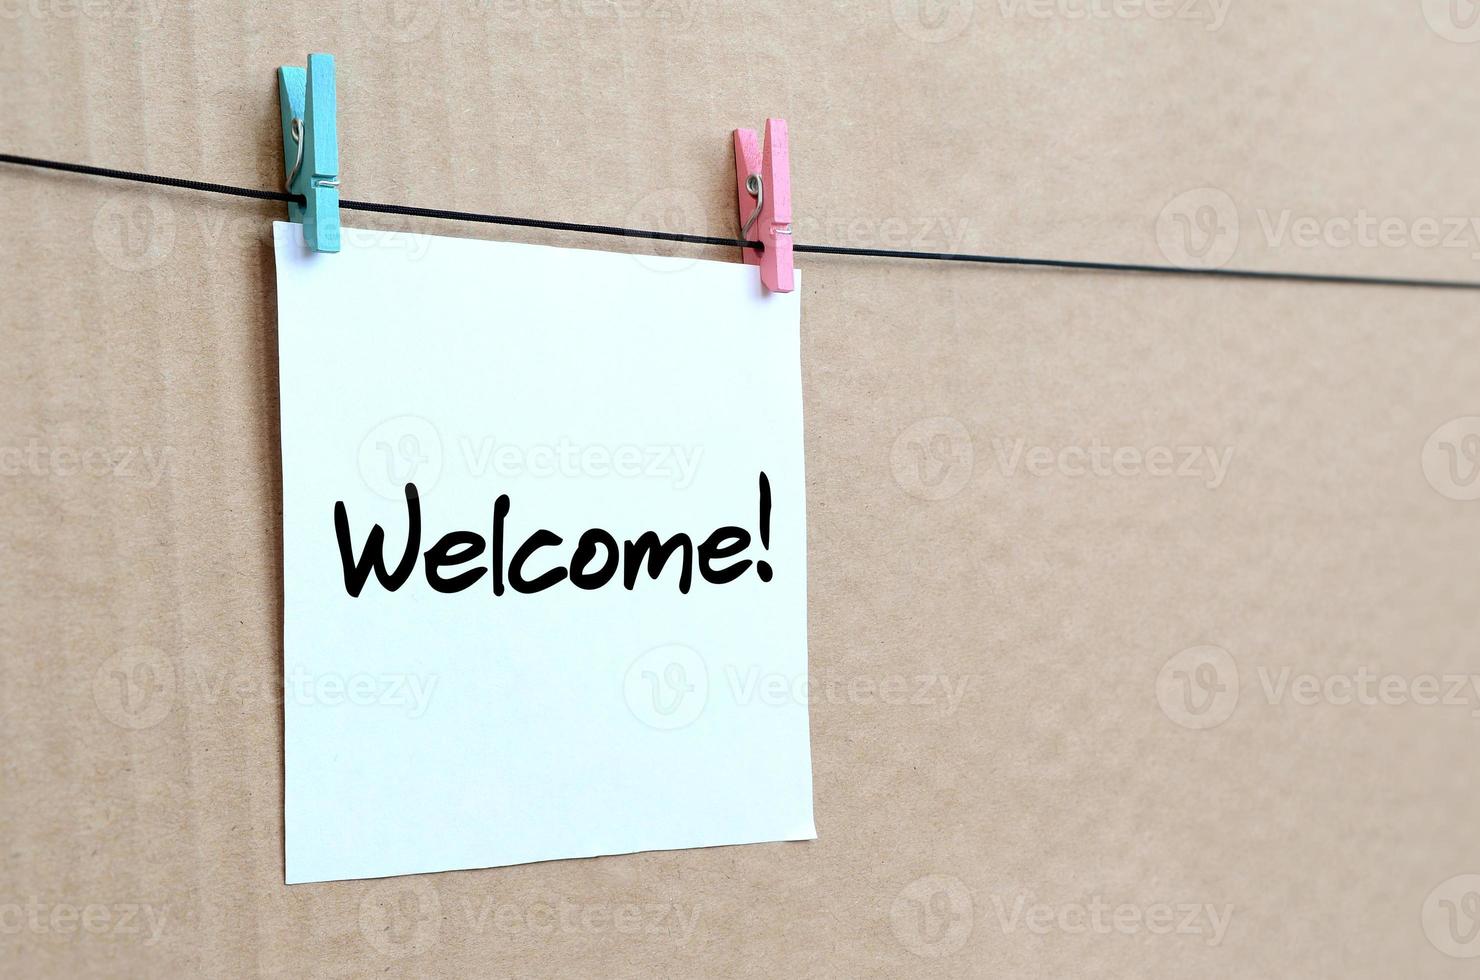 Welcome Note is written on a white sticker that hangs with a clothespin on a rope on a background of brown cardboard photo